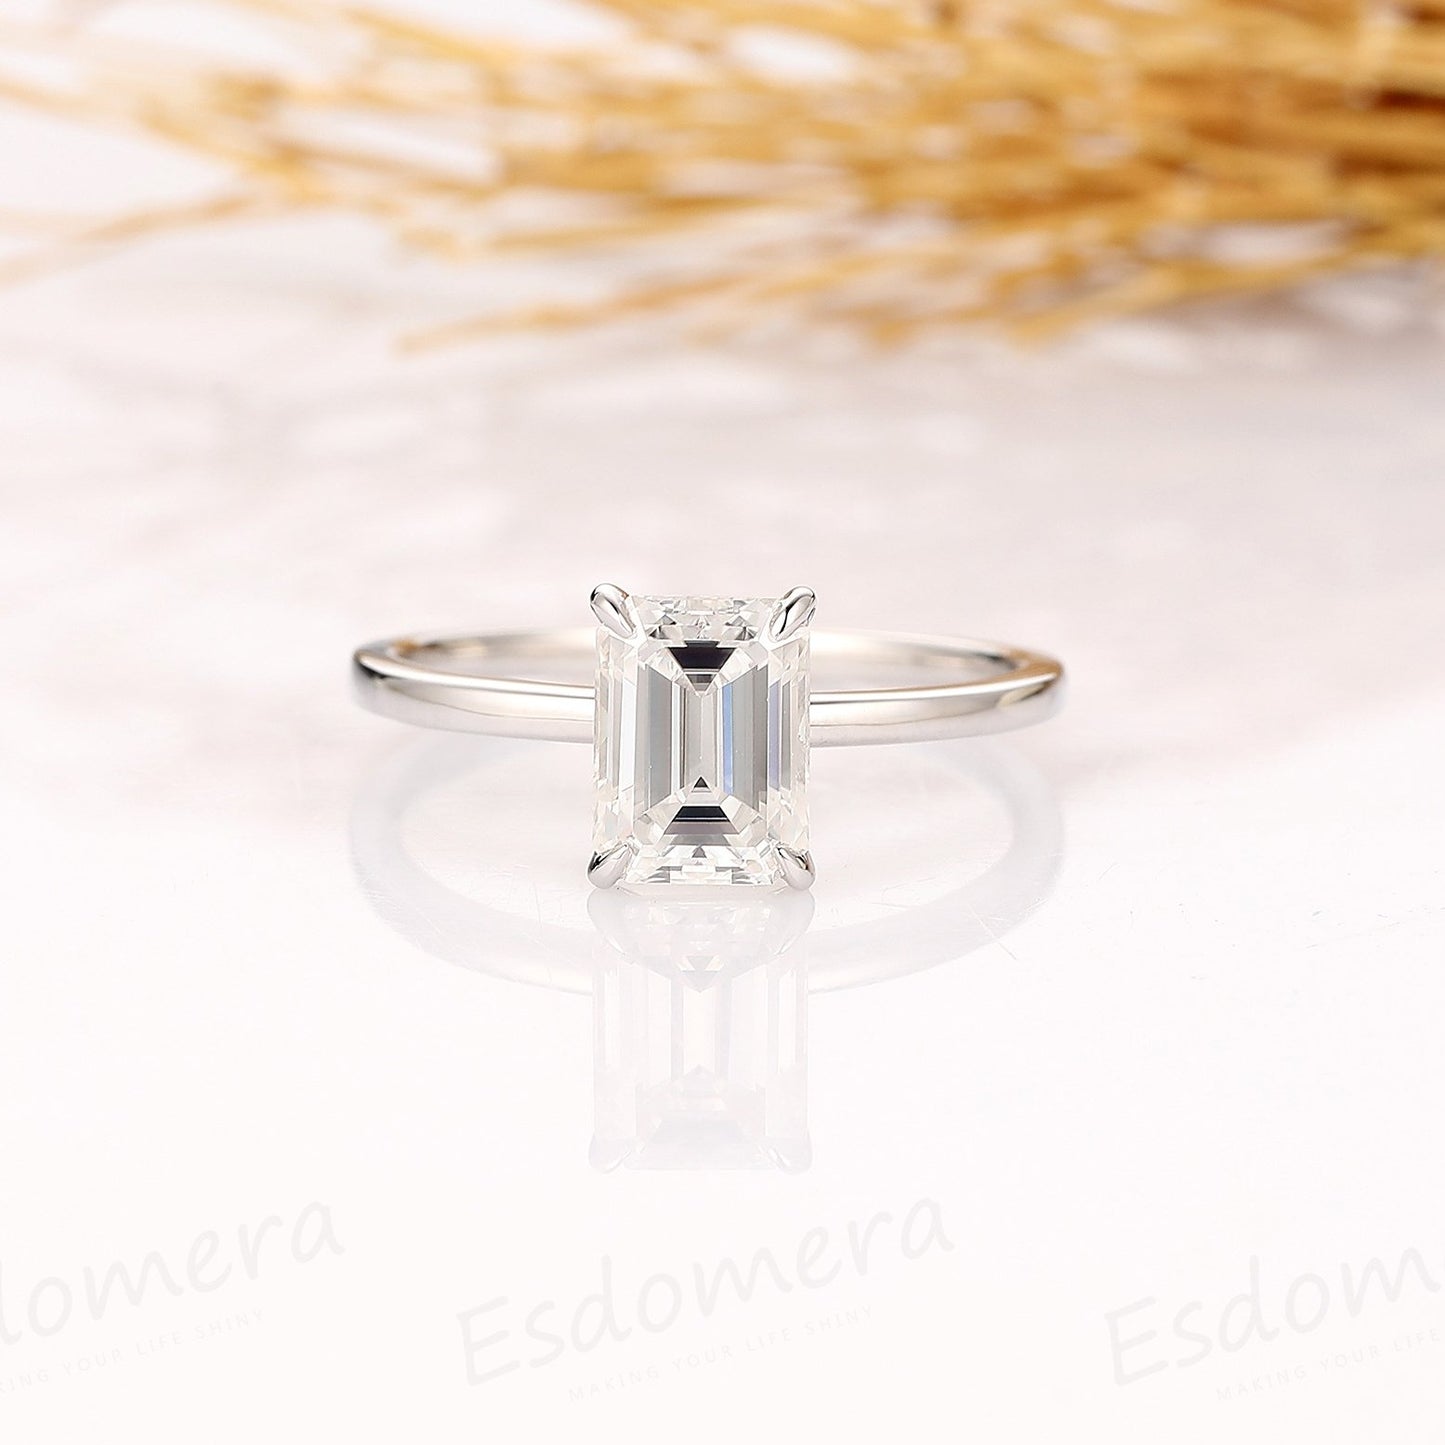 2CT Emerald Cut Moissanite Ring, 14k Solid White Gold Engagement Ring, Classic Ring Design